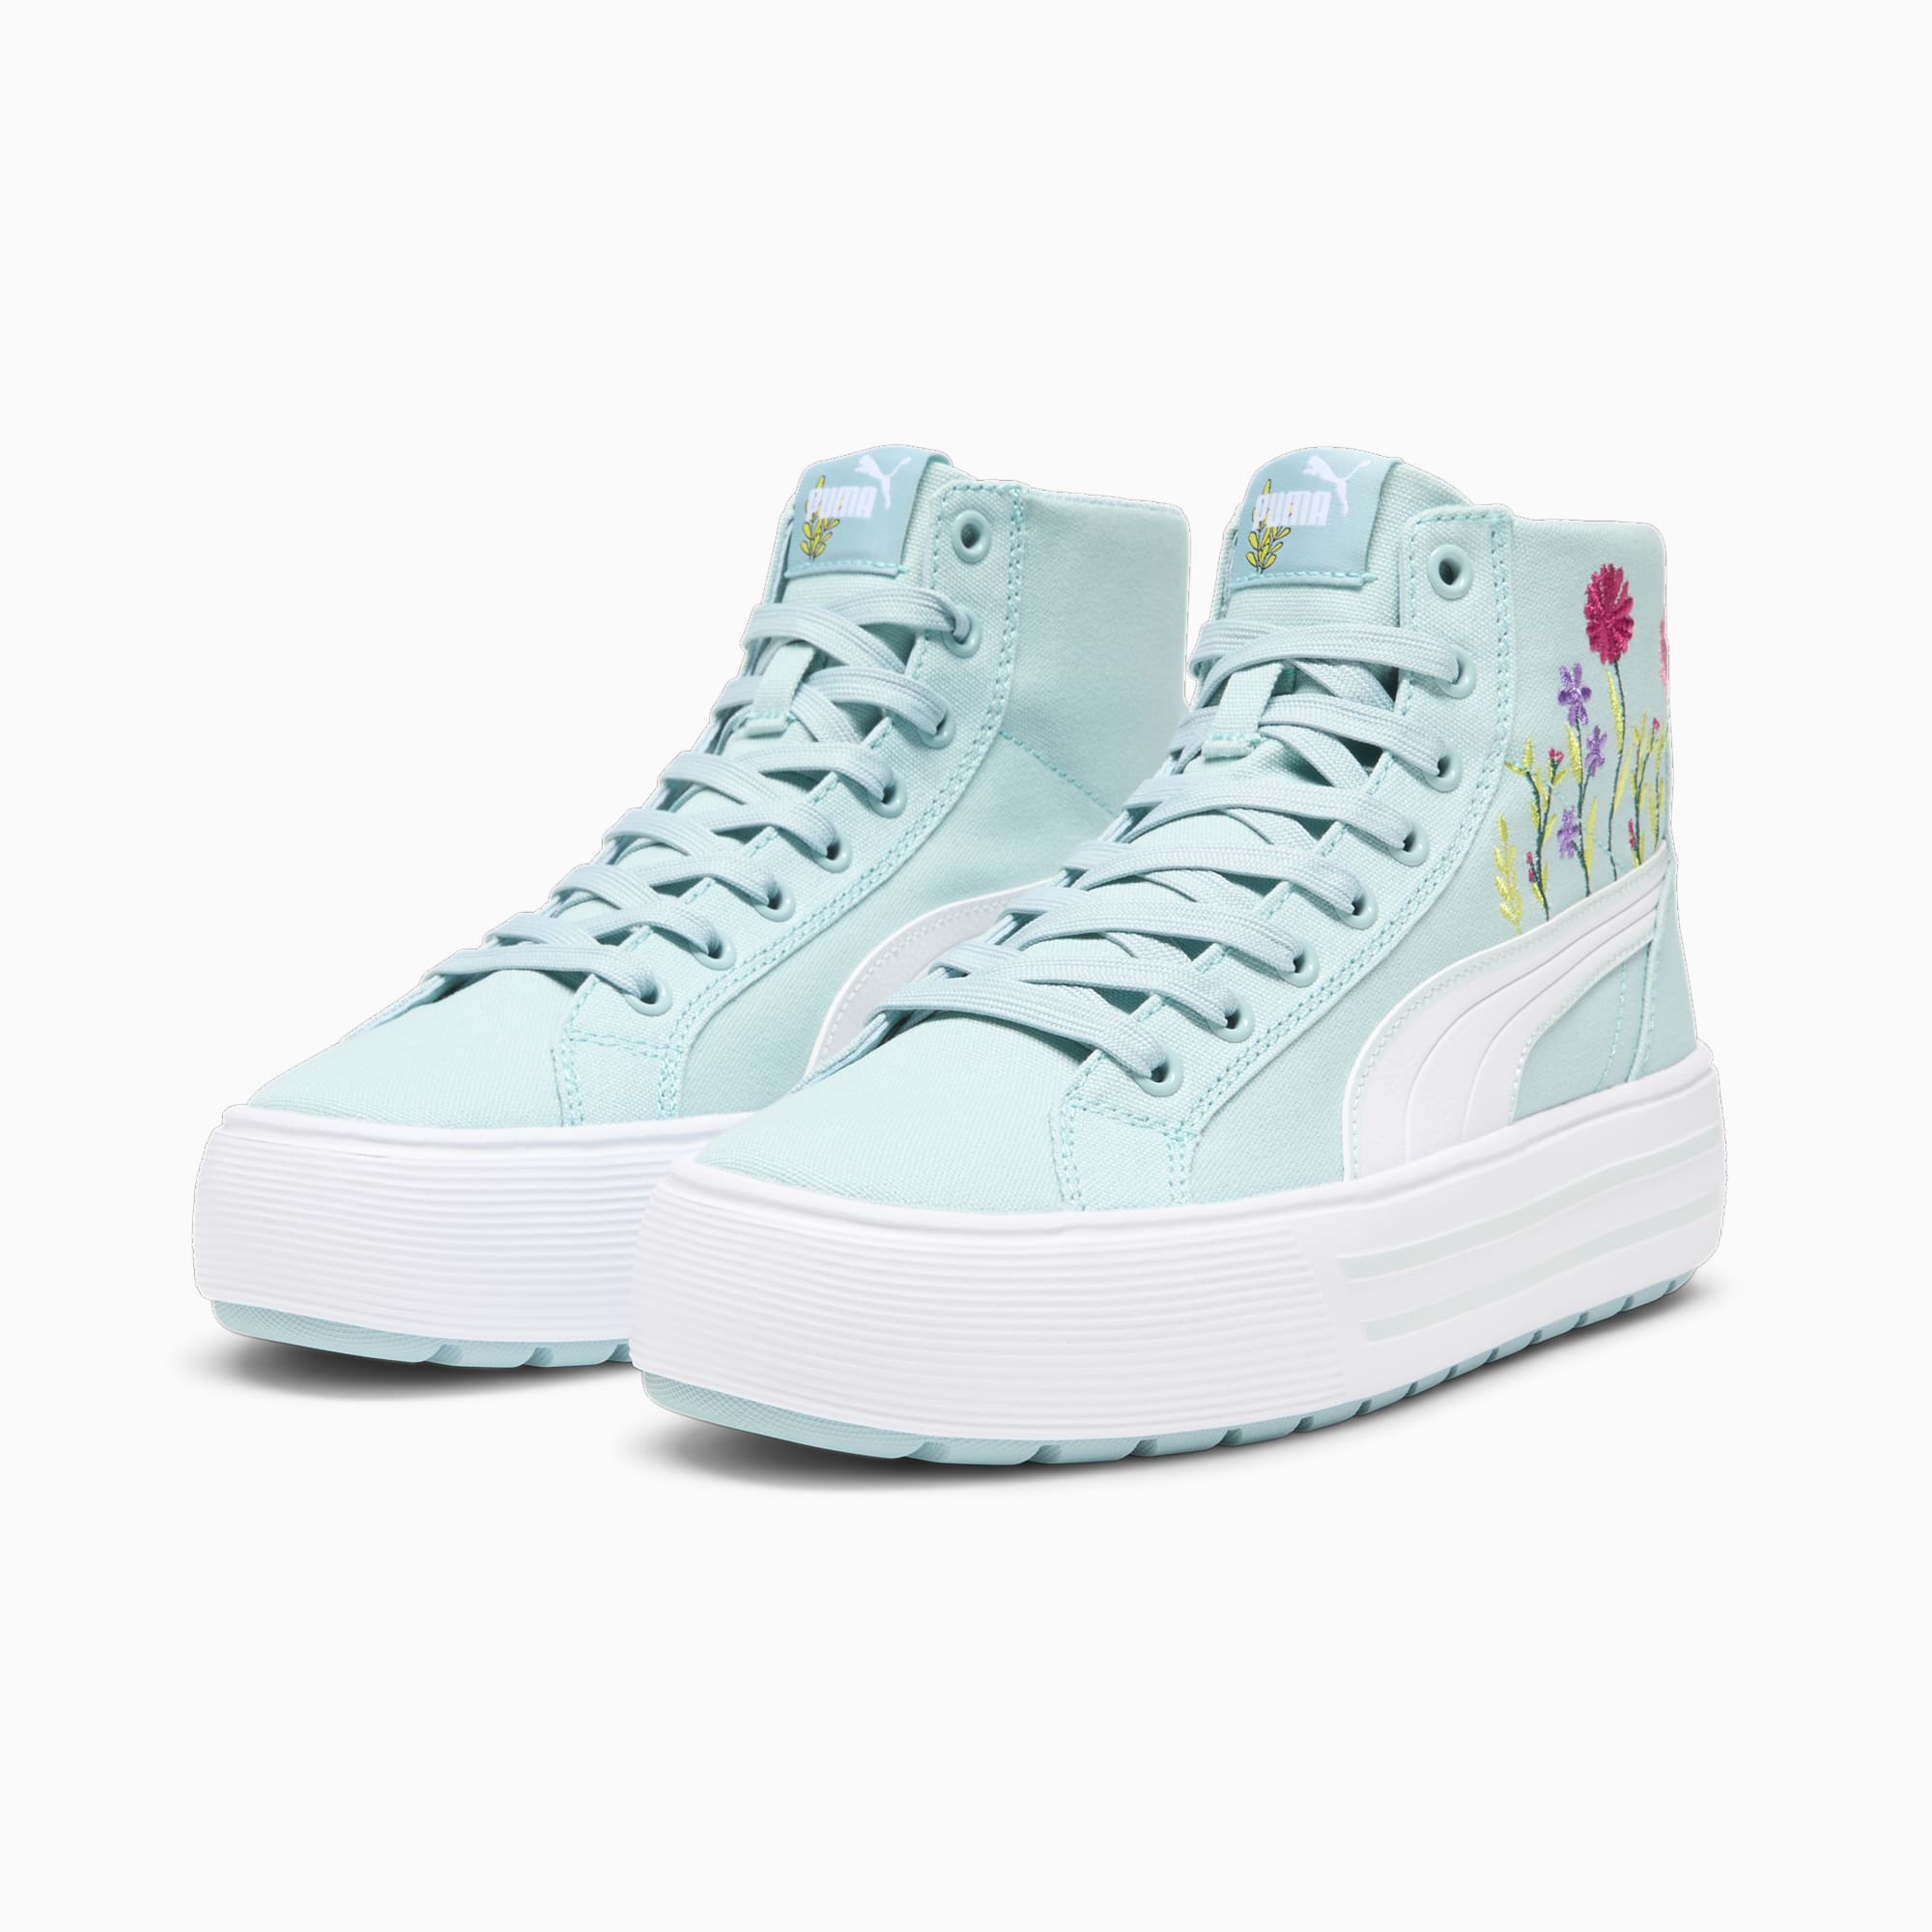 Kaia 2.0 Mid Floral Women's Sneakers | PUMA